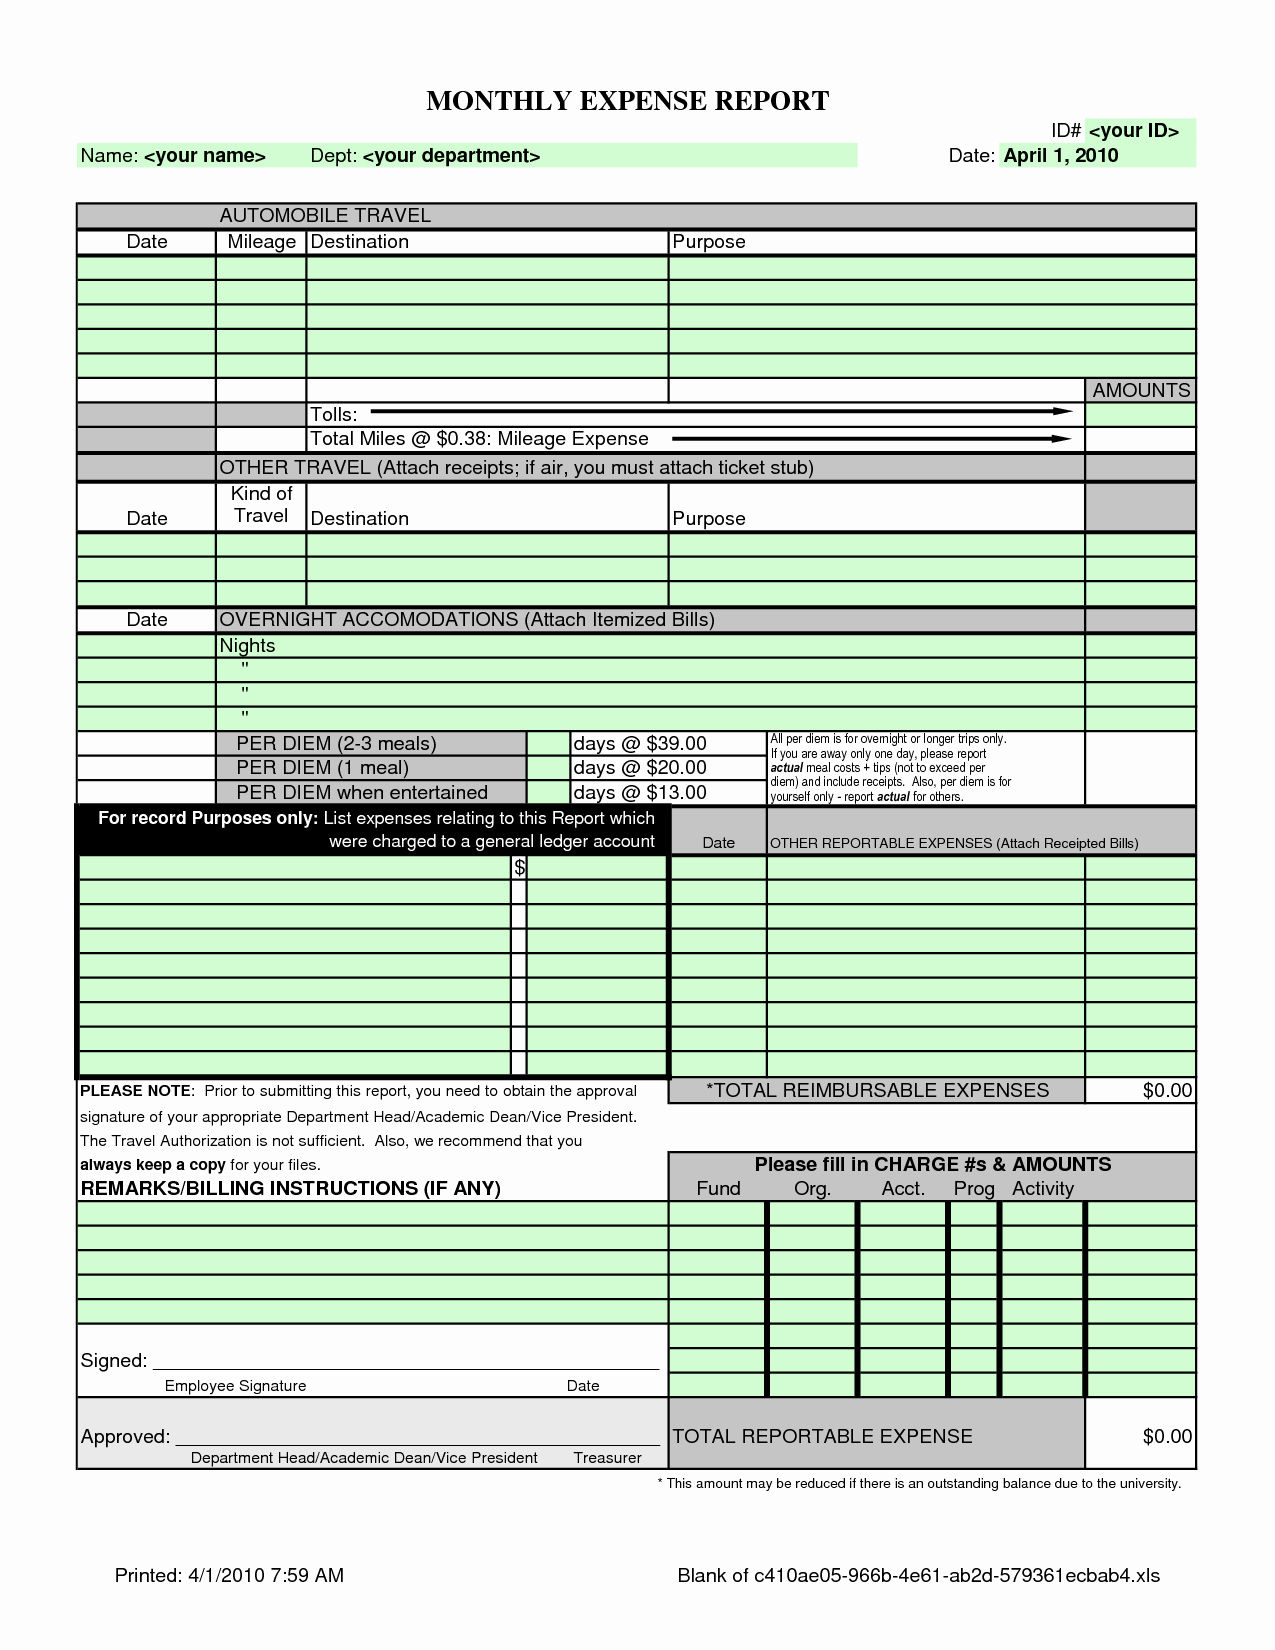 Credit Card Expense Report Template Awesome Monthly Expense Report Template